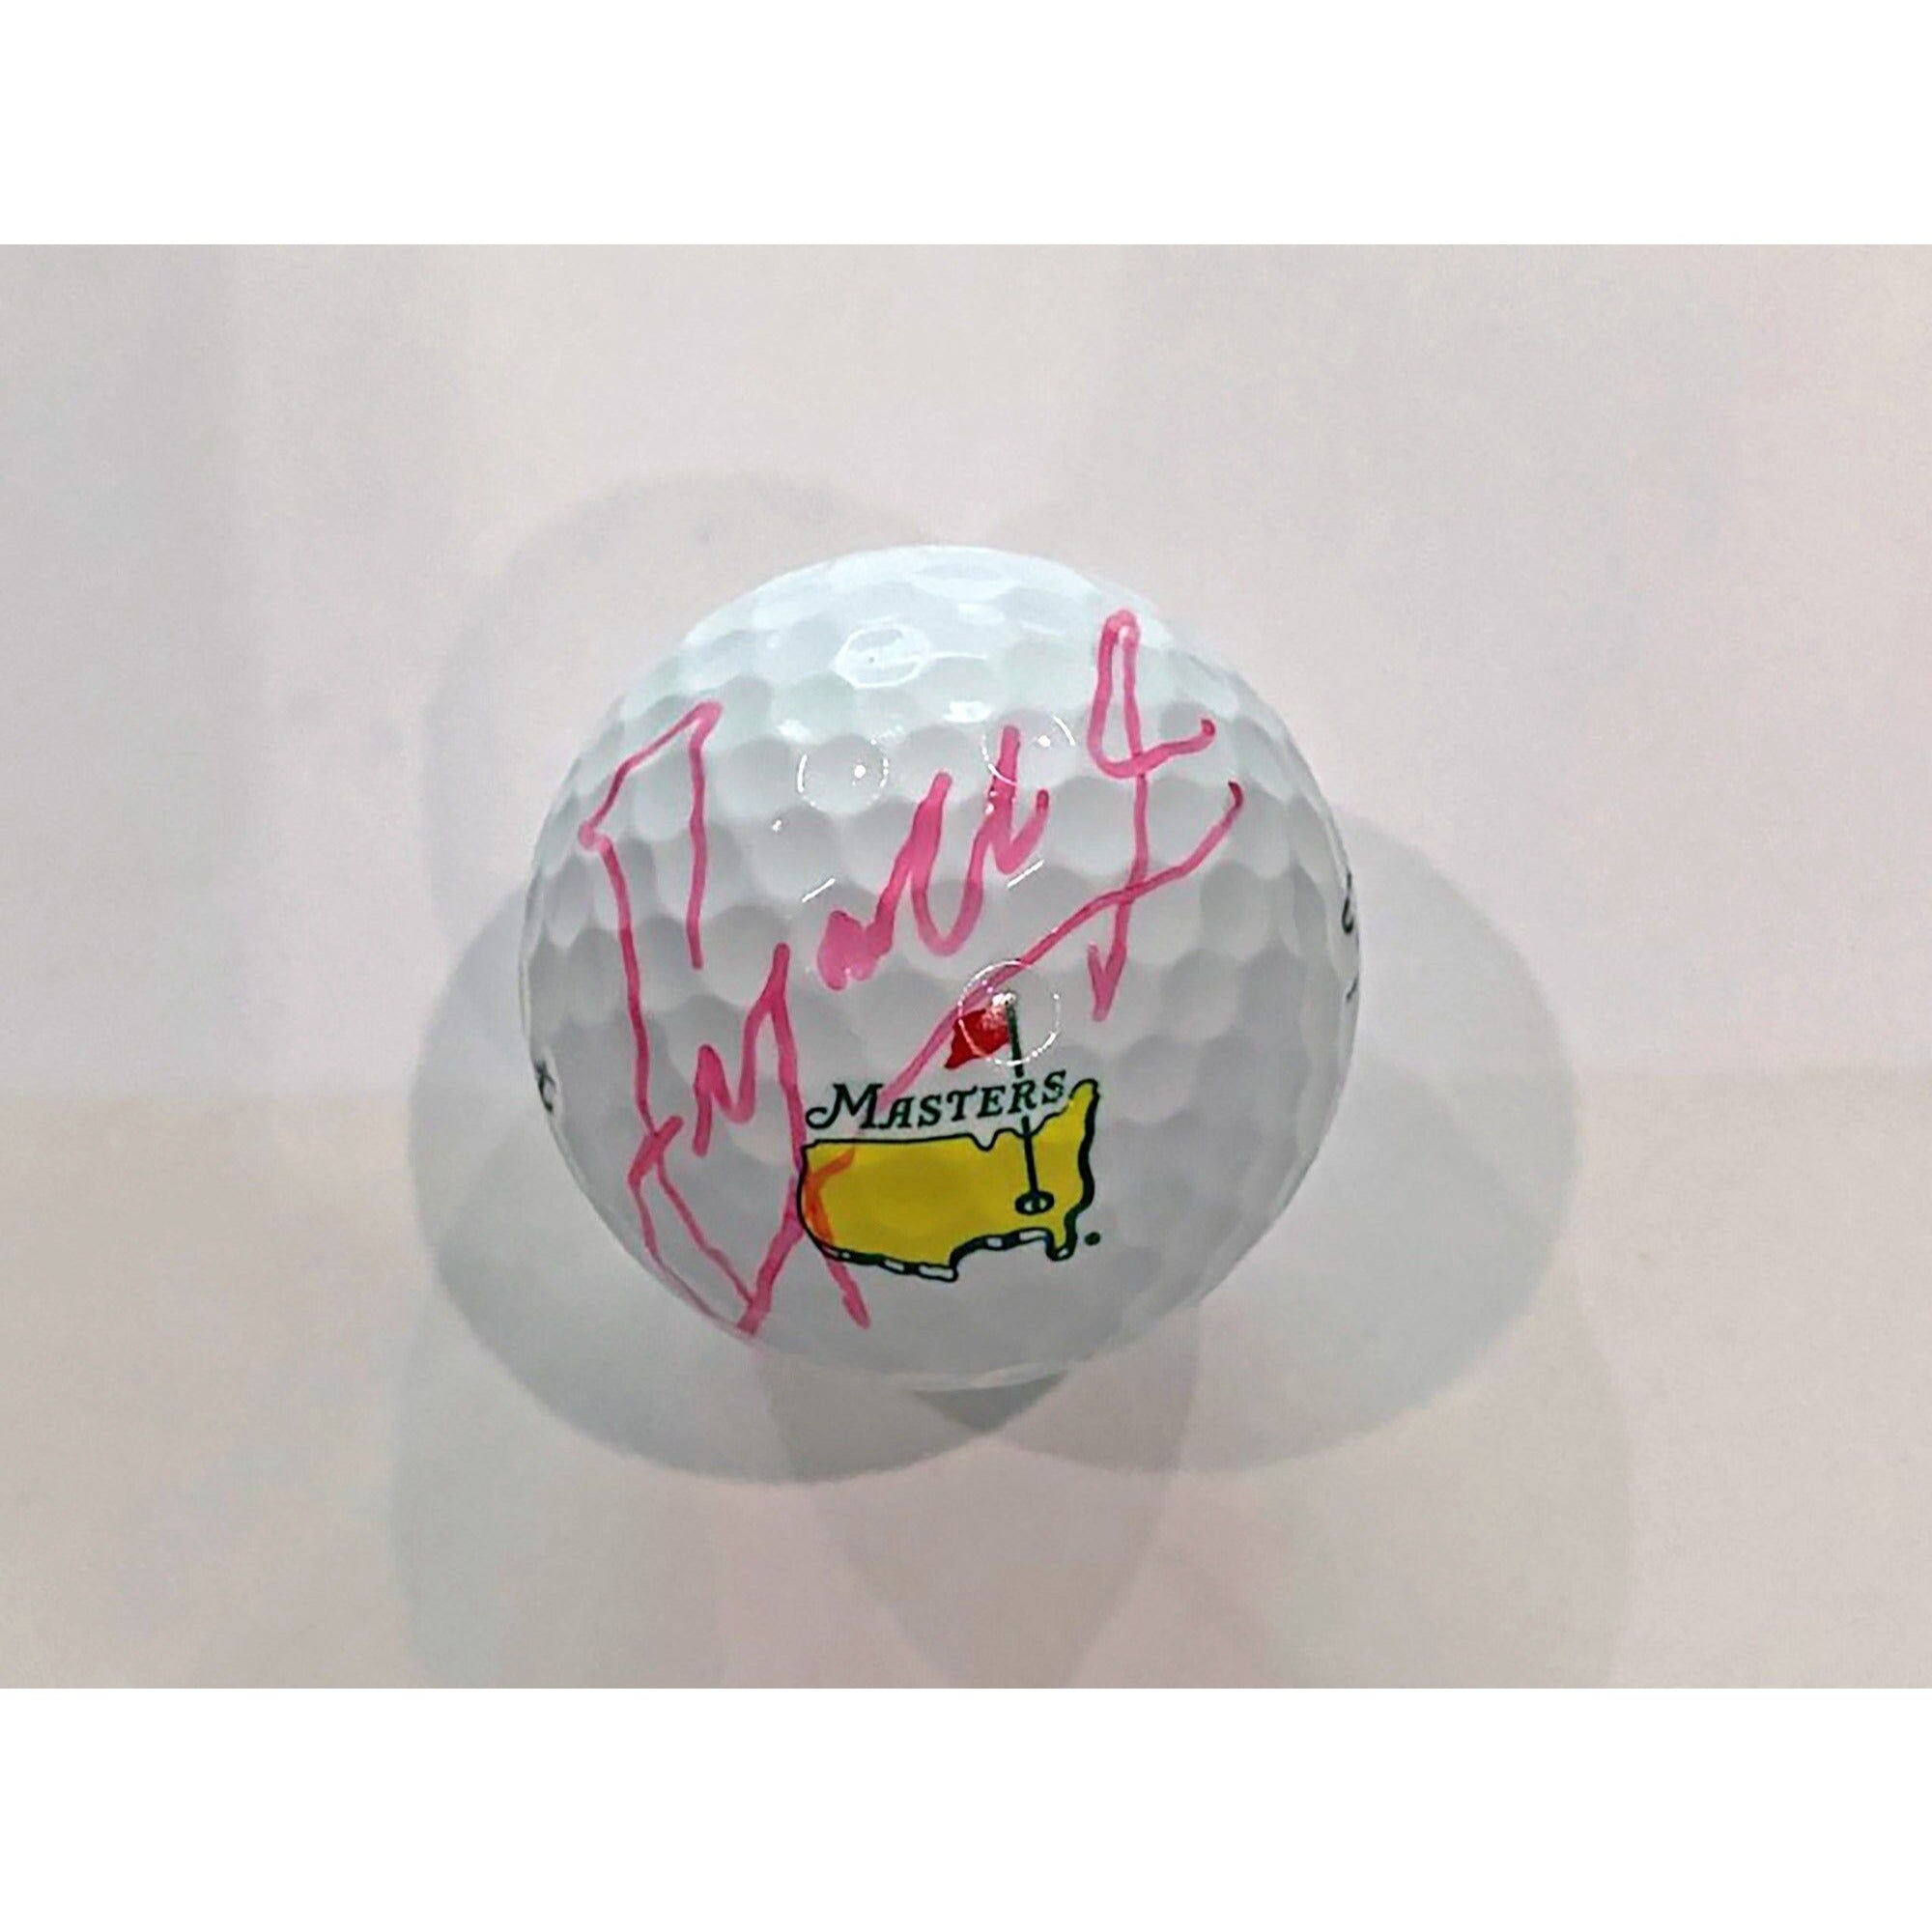 Fuzzy Zoeller Masters champion signed golf ball with proof